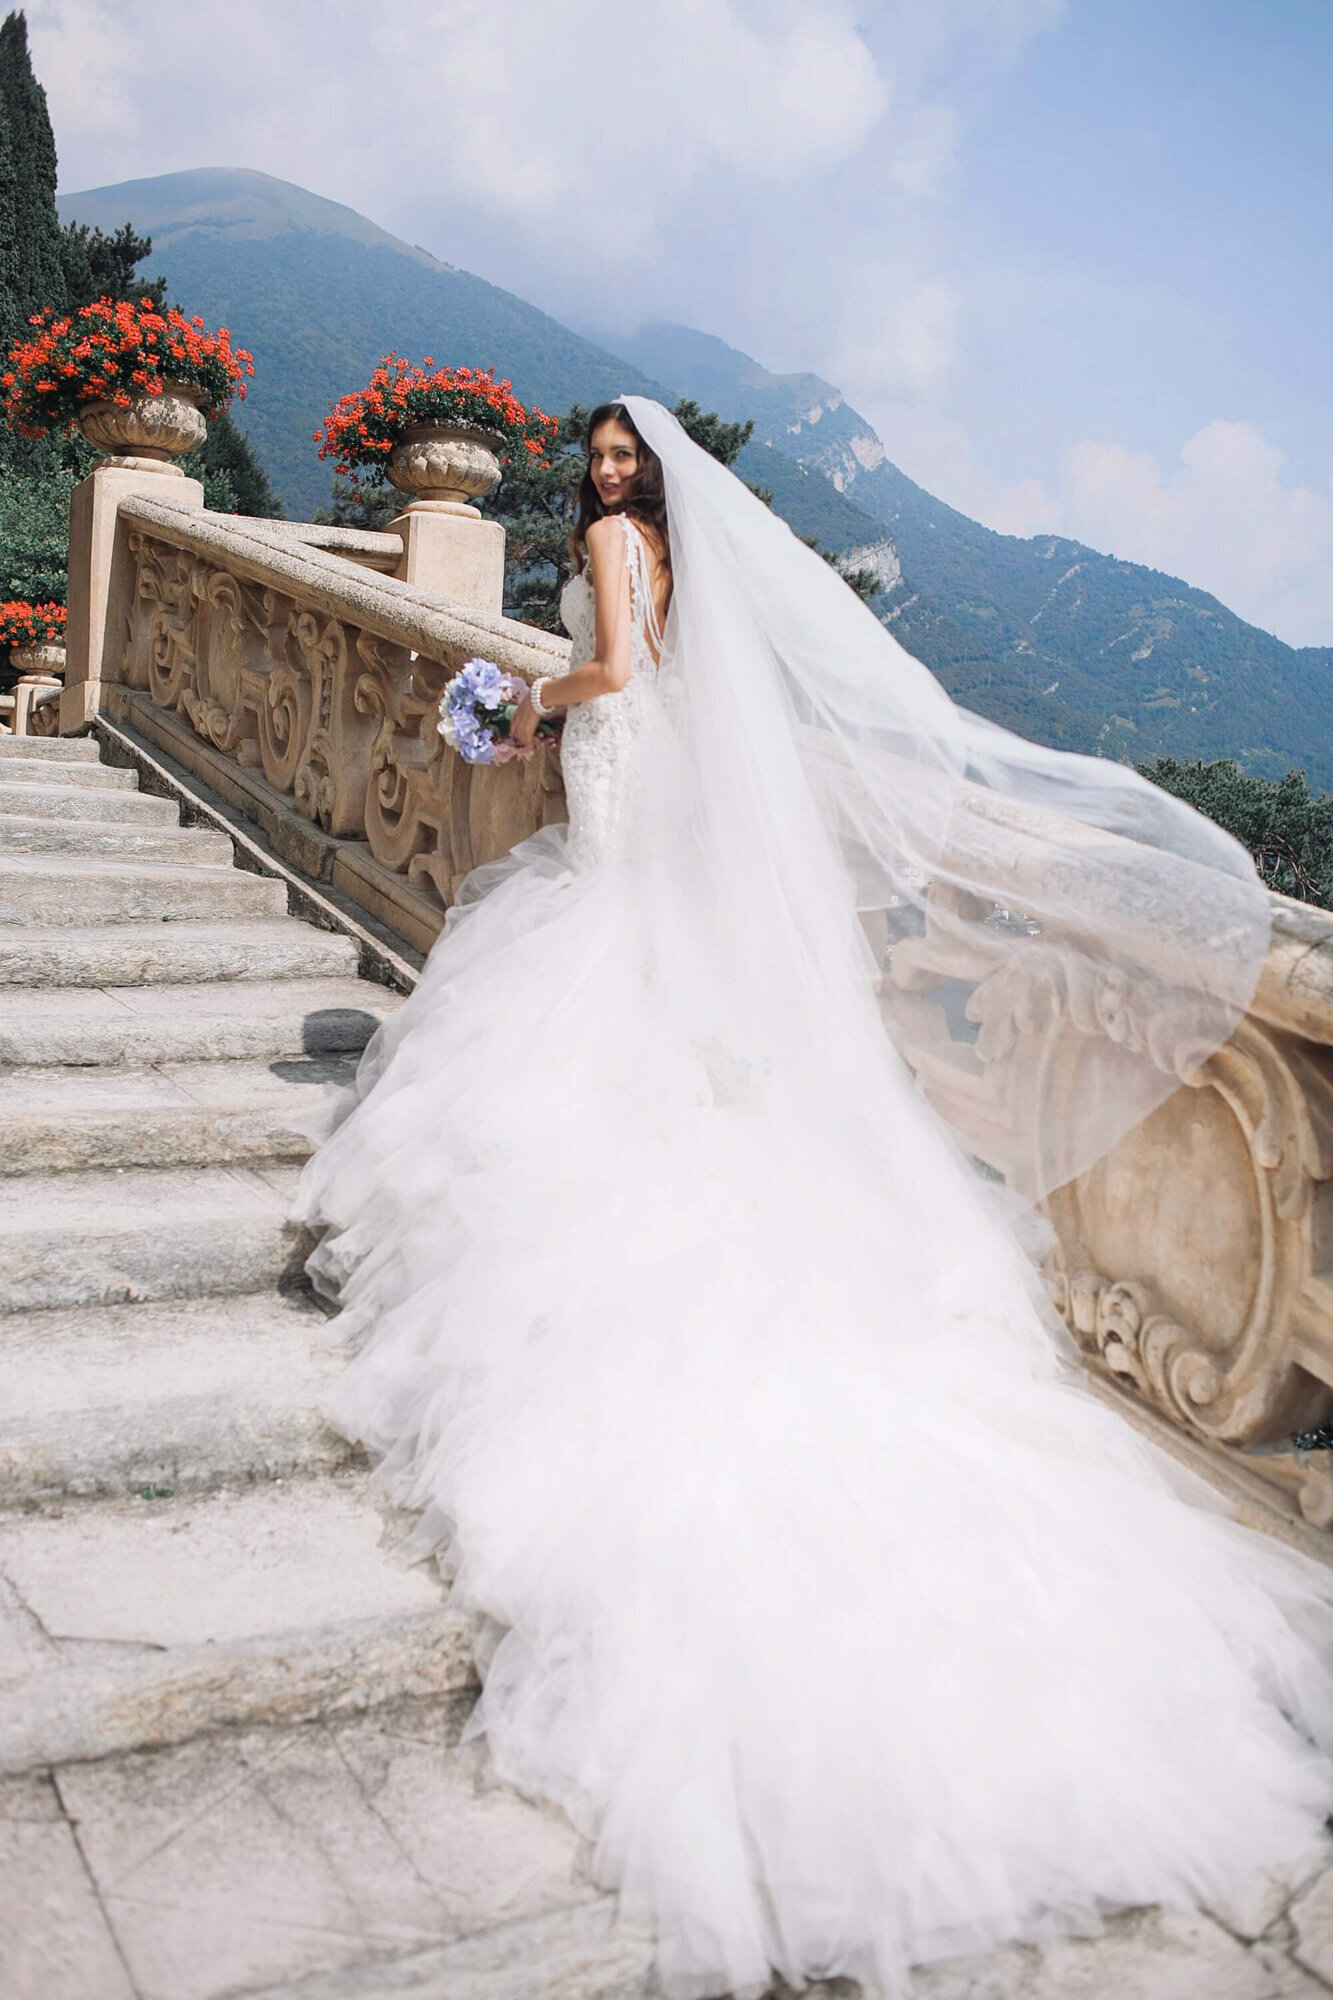 Bride wearing her grand wedding gown walking up the stairs